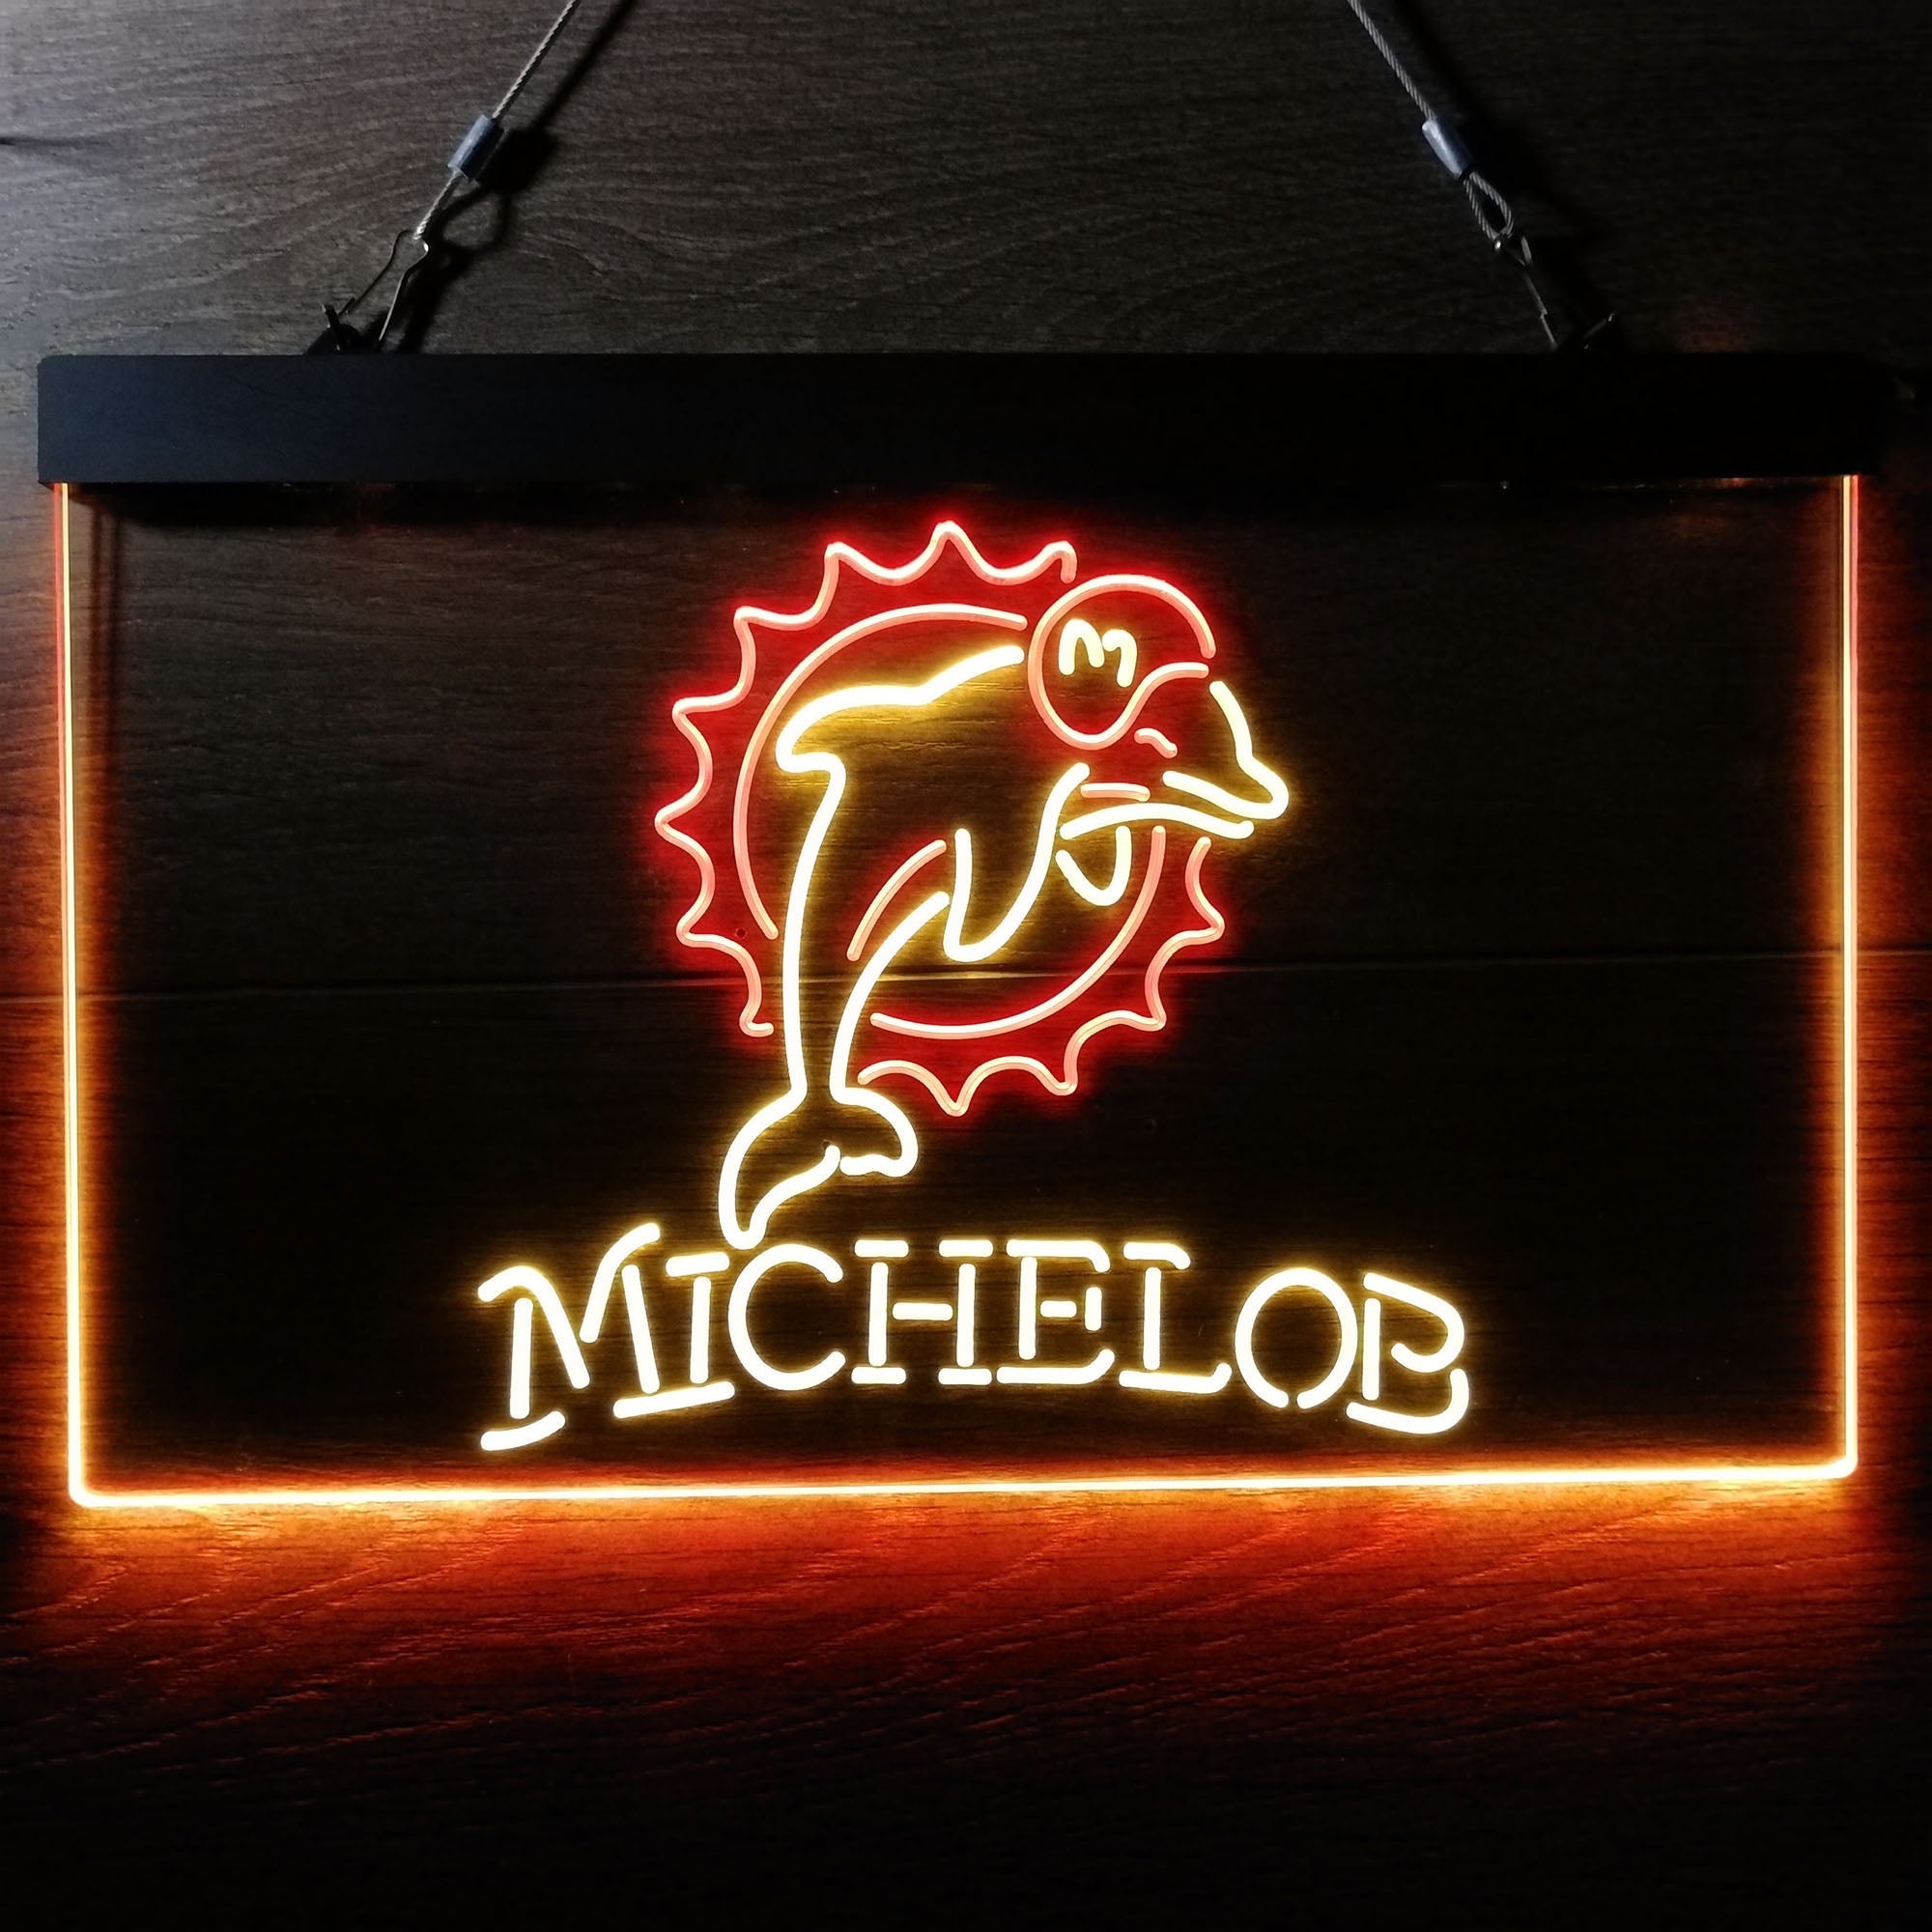 Michelob Bar Miami Dolphins Est. 1966 Neon-Like LED Sign